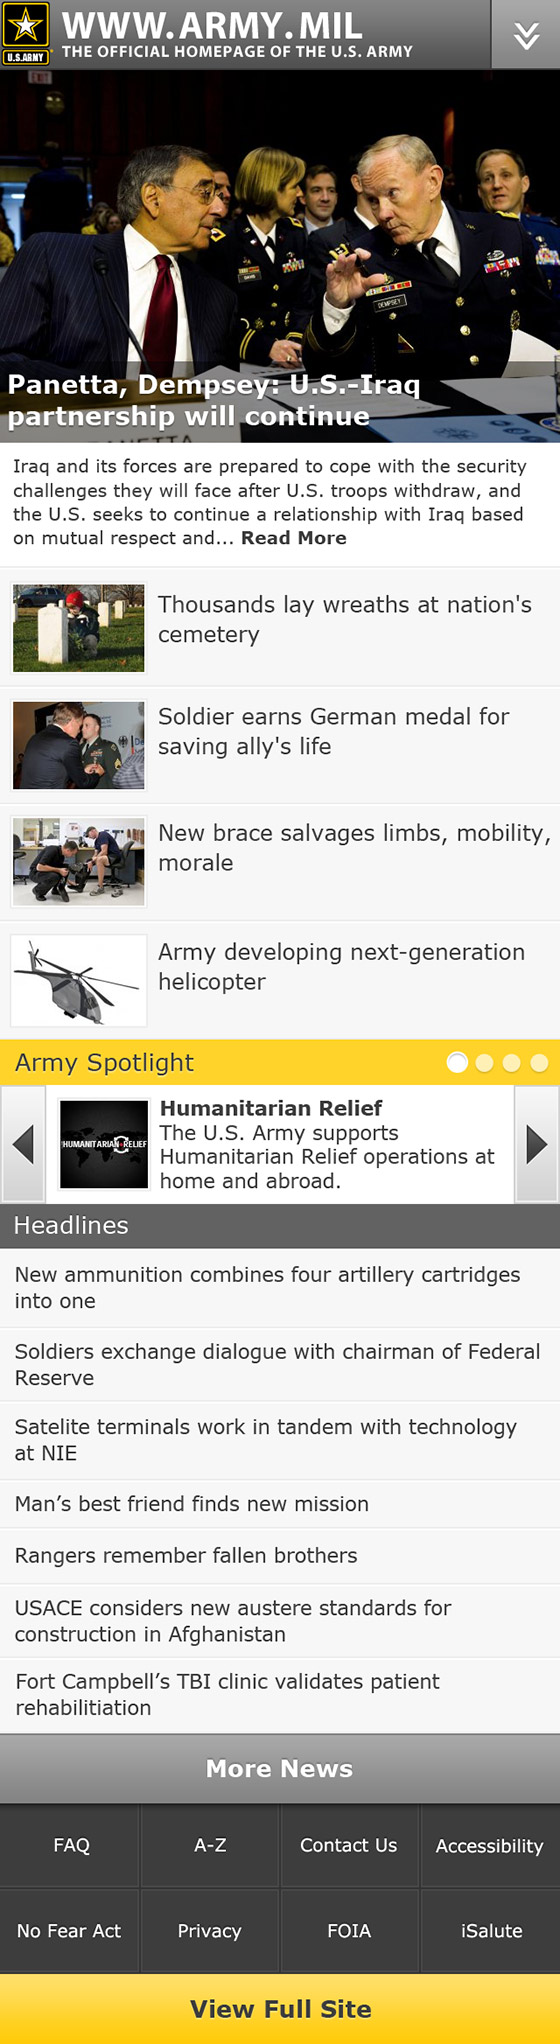 Army.mil mobile design